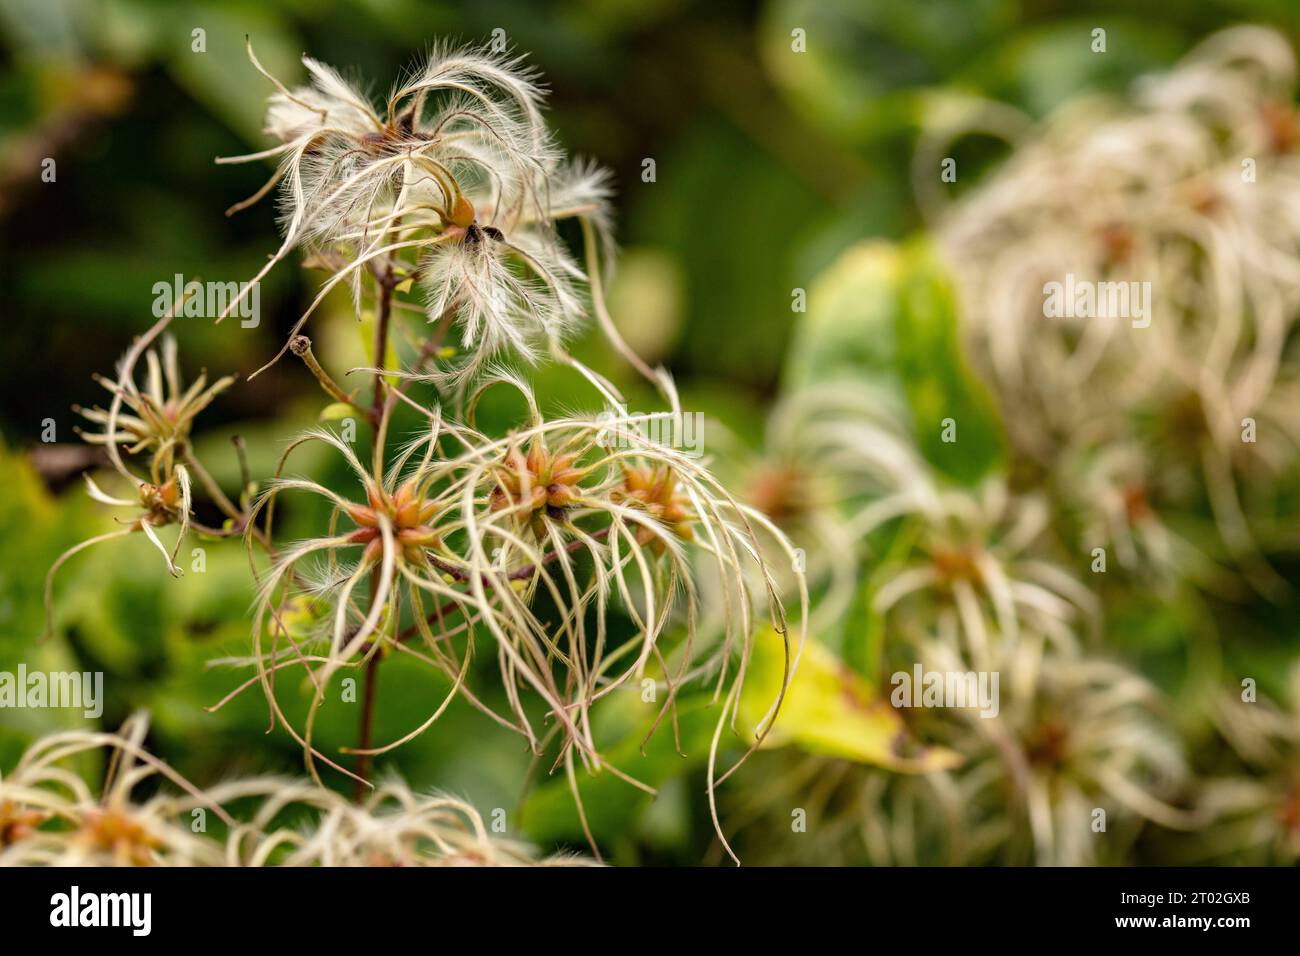 Natural close up plant portrait of Usnea Subfloridana (old man’s beard) showing natures chaos in its structure Stock Photo